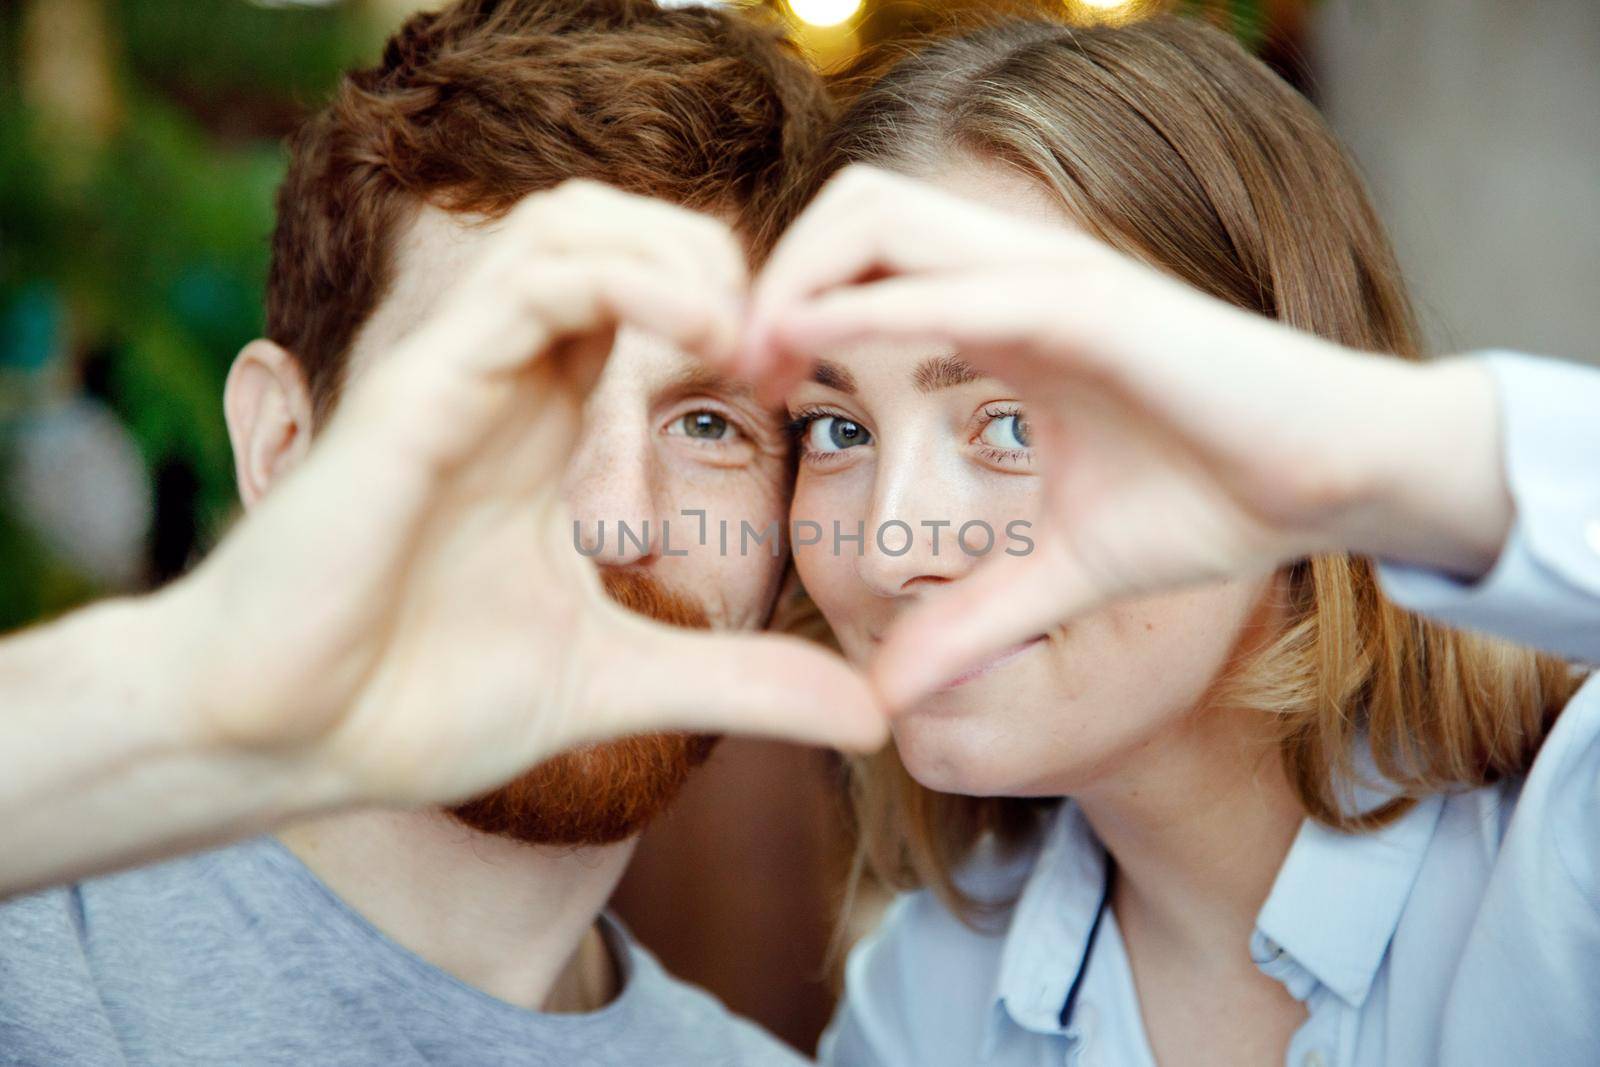 Young loving couple stacking hands creating heart while posing contently together.